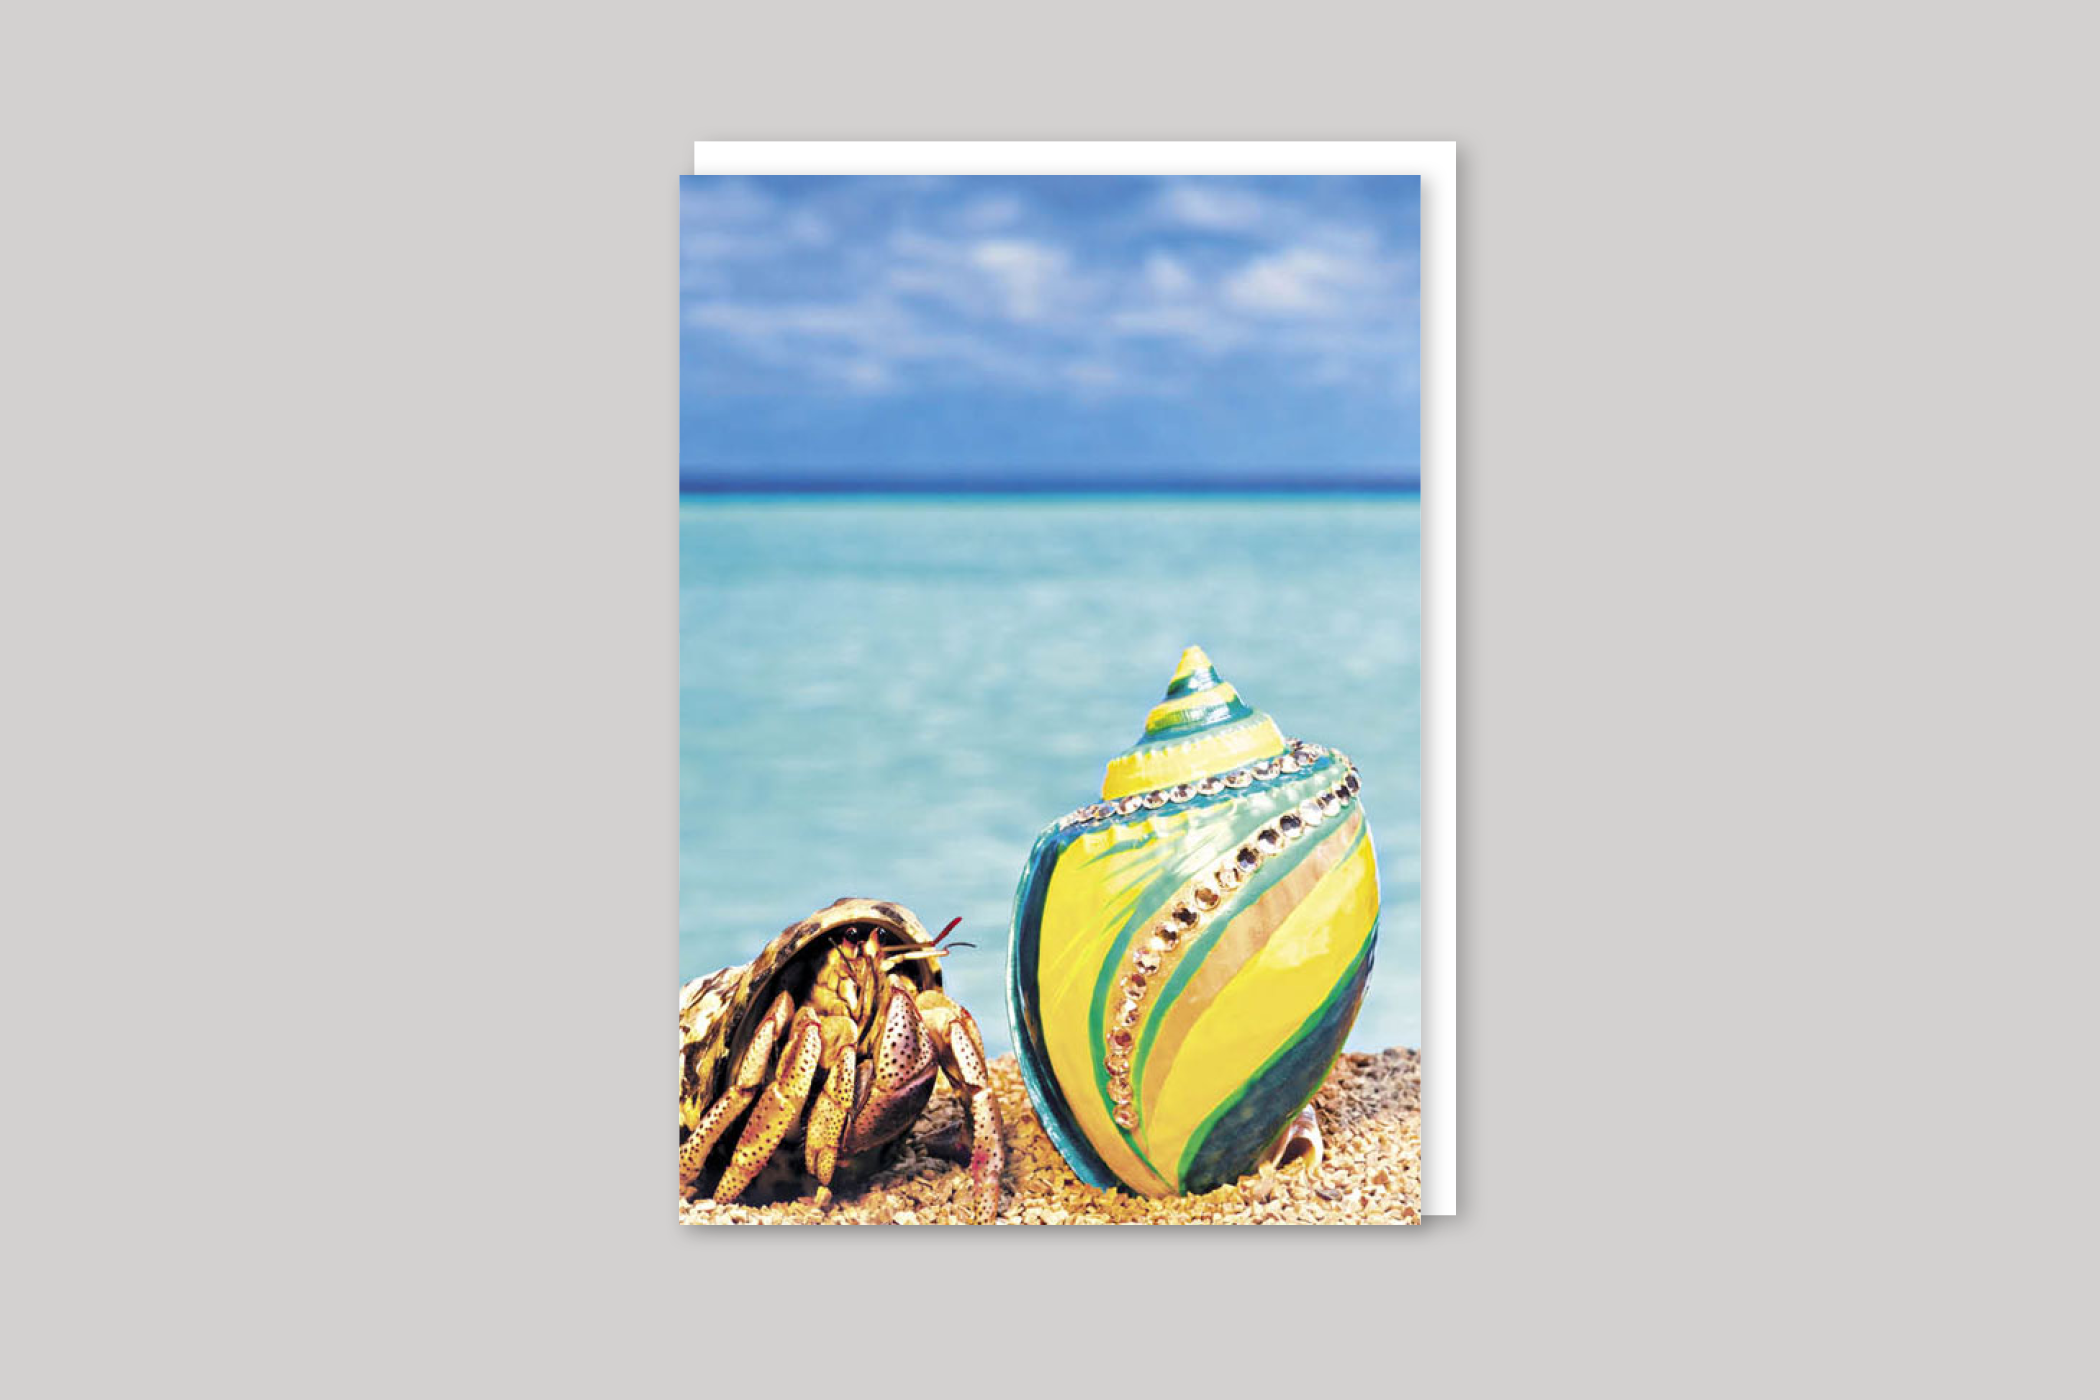 New Shell new home card from Exposure range of photographic cards by Icon, back page.